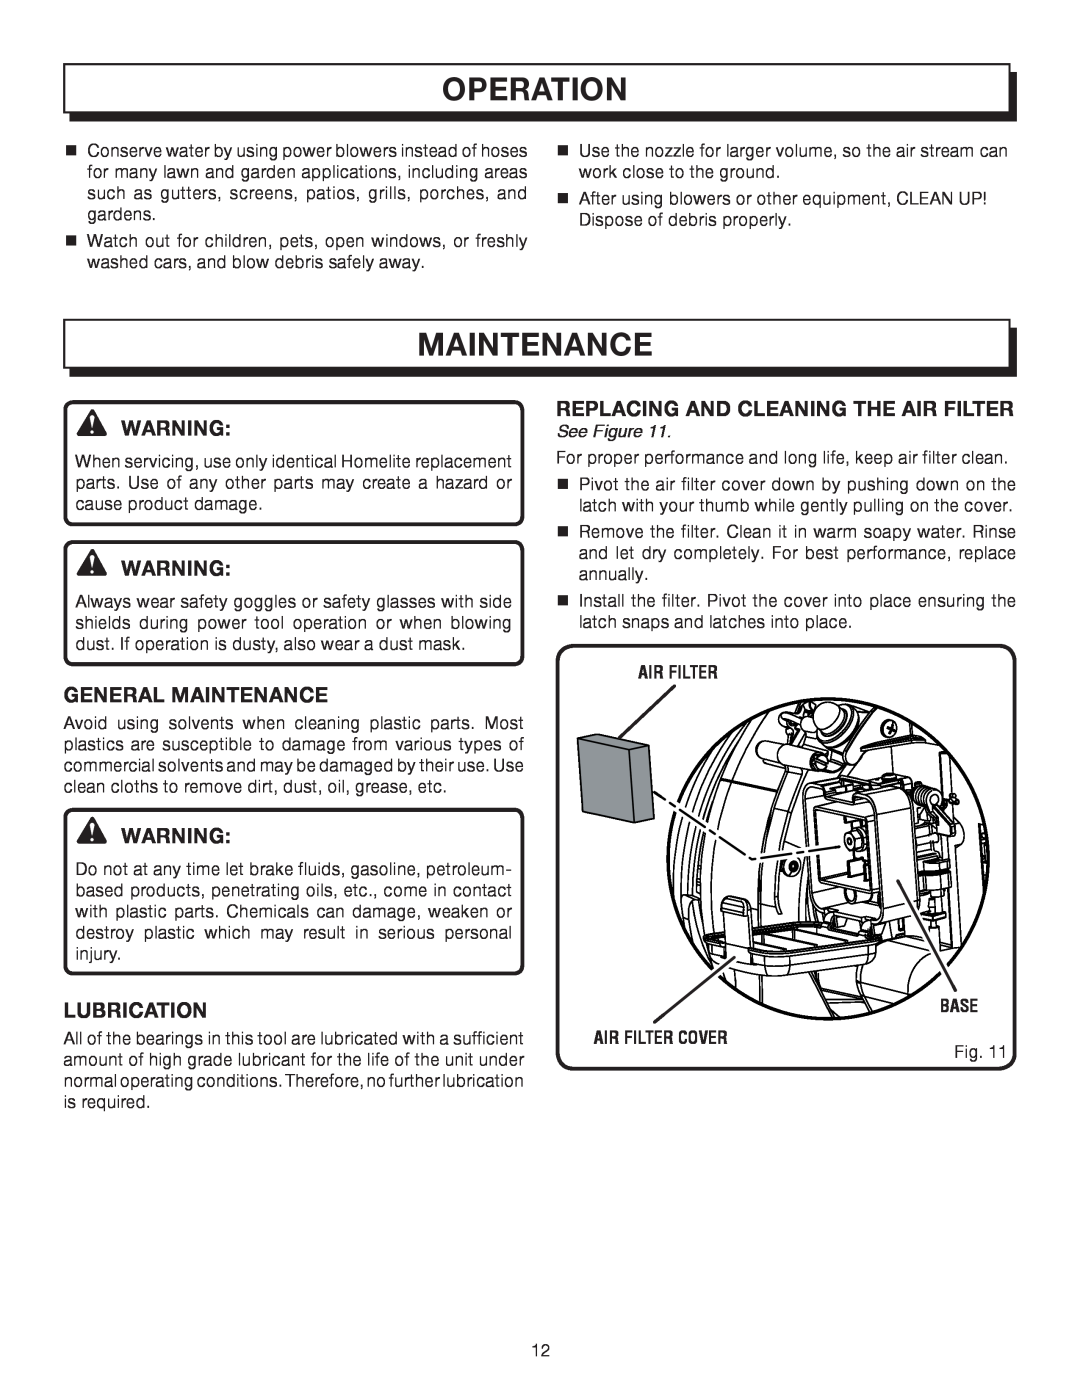 Homelite UT08572 manual Operation, General Maintenance, Lubrication, Replacing And Cleaning The Air Filter, See Figure 